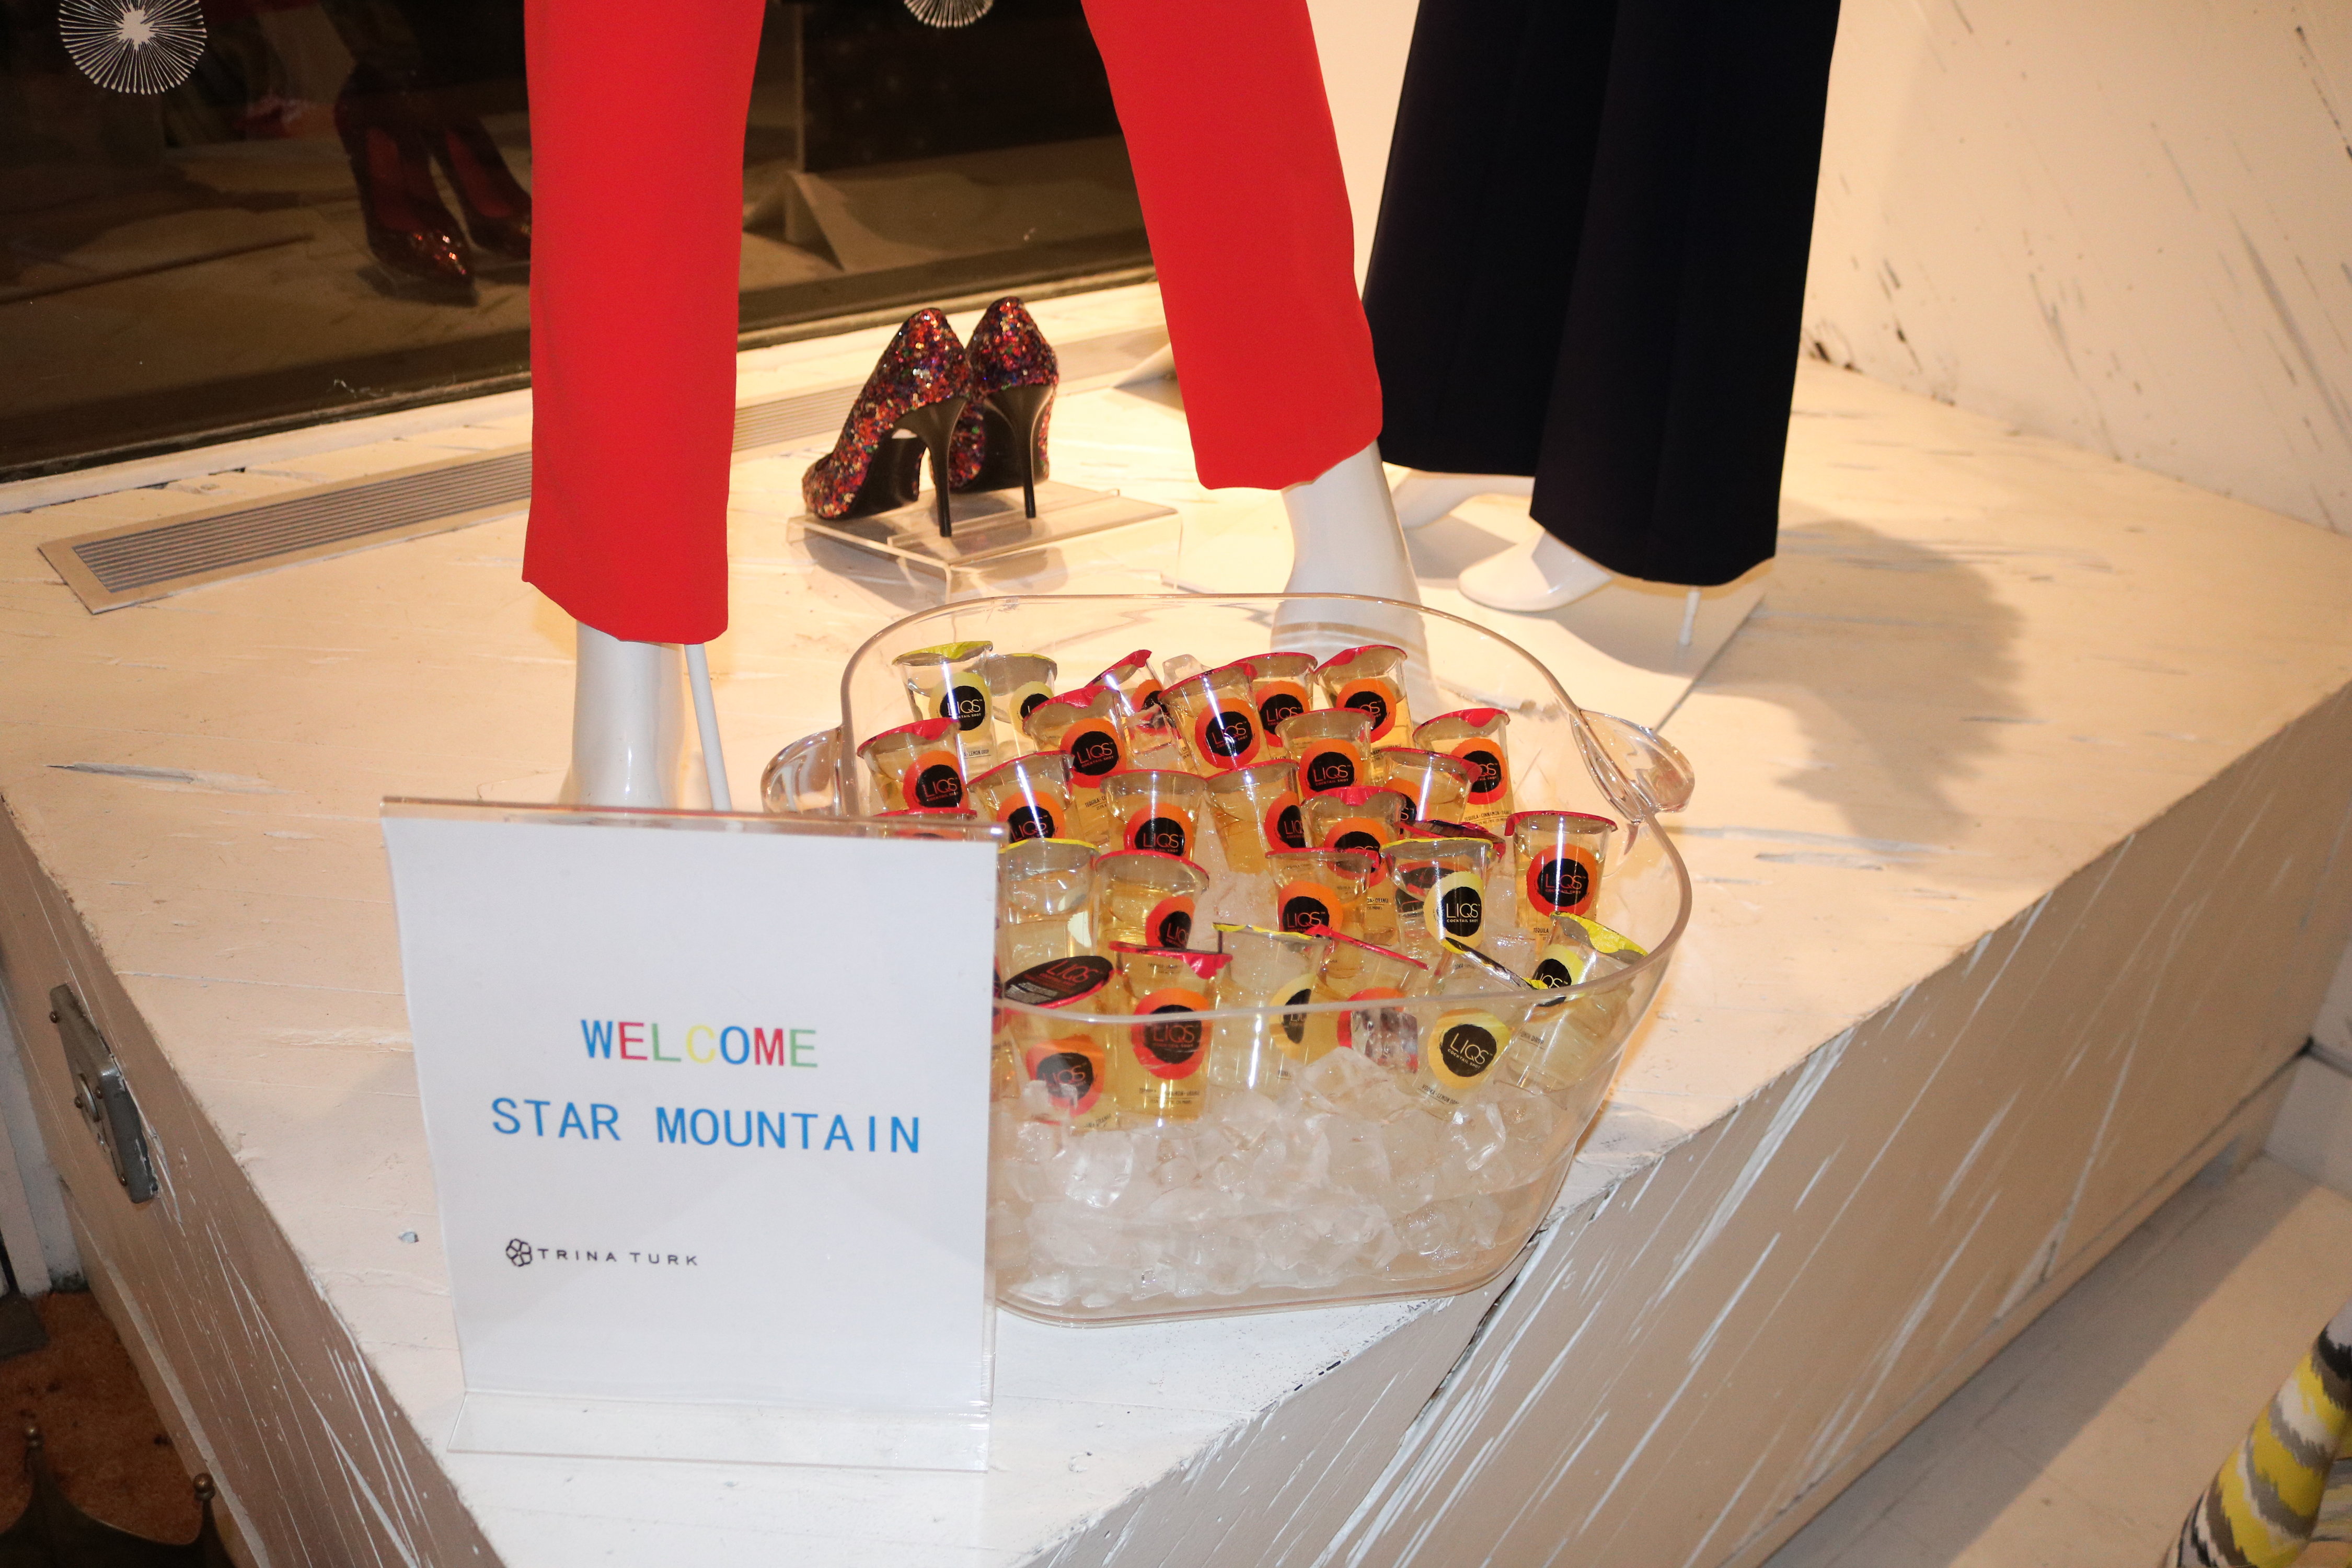 Star Mountain Charitable Foundation & Trina Turk Holiday Shopping Event (12/7/16)